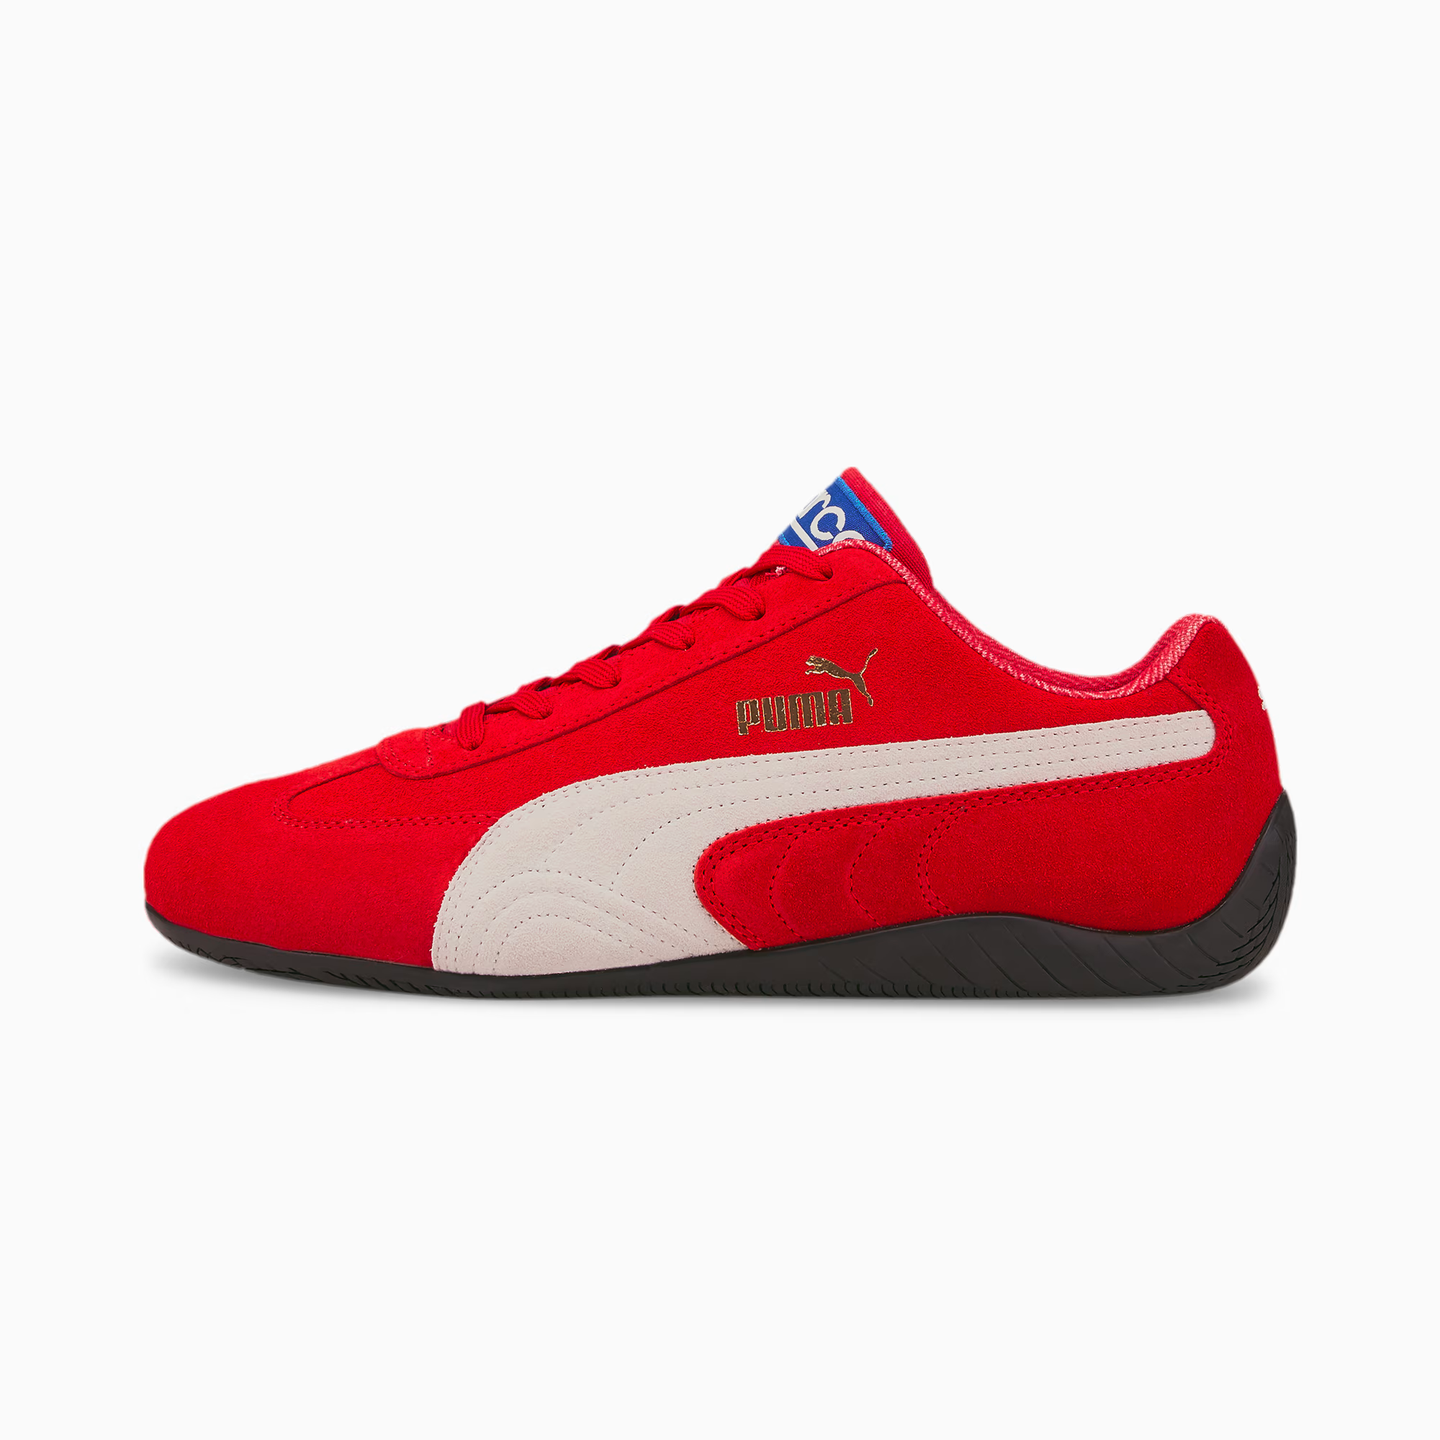 a pair of red and white puma shoes on a white background​​​​‌﻿‍﻿​‍​‍‌‍﻿﻿‌﻿​‍‌‍‍‌‌‍‌﻿‌‍‍‌‌‍﻿‍​‍​‍​﻿‍‍​‍​‍‌﻿​﻿‌‍​‌‌‍﻿‍‌‍‍‌‌﻿‌​‌﻿‍‌​‍﻿‍‌‍‍‌‌‍﻿﻿​‍​‍​‍﻿​​‍​‍‌‍‍​‌﻿​‍‌‍‌‌‌‍‌‍​‍​‍​﻿‍‍​‍​‍‌‍‍​‌﻿‌​‌﻿‌​‌﻿​​‌﻿​﻿​﻿‍‍​‍﻿﻿​‍﻿﻿‌﻿‌‍‌‍‍‌‌﻿​﻿‌﻿‌‌‌‍​‌‌‍﻿​​‍﻿‌‌‍‌‌‌‍‌​‌‍‍‌‌﻿‌​‌‍‍‌‌‍﻿‍‌‍‌﻿​‍﻿‌‌﻿​﻿‌﻿‌​‌﻿‌‌‌‍‌​‌‍‍‌‌‍﻿﻿​‍﻿‍‌﻿​﻿‌‍​‌‌‍﻿‍‌‍‍‌‌﻿‌​‌﻿‍‌​‍﻿‍‌‍​‍‌﻿‌‌‌‍‍‌‌‍﻿​‌‍‌​​‍﻿﻿‌﻿​‍‌‍‌‌‌‍﻿‌‌‍‍‌‌﻿‍​​‍﻿﻿‌‍‍‌‌‍﻿‍‌﻿‌​‌‍‌‌‌‍﻿‍‌﻿‌​​‍﻿﻿‌‍‌‌‌‍‌​‌‍‍‌‌﻿‌​​‍﻿﻿‌‍﻿‌‌‍﻿﻿‌‍‌​‌‍‌‌​﻿﻿‌‌﻿​​‌﻿​‍‌‍‌‌‌﻿​﻿‌‍‌‌‌‍﻿‍‌﻿‌​‌‍​‌‌﻿‌​‌‍‍‌‌‍﻿﻿‌‍﻿‍​﻿‍﻿‌‍‍‌‌‍‌​​﻿﻿‌​﻿​​​﻿‌​‌‍‌‌‌‍‌‌‌‍‌‌​﻿​​​﻿​﻿​﻿​‍​‍﻿‌​﻿‌​‌‍‌‌​﻿‌﻿​﻿‍‌​‍﻿‌​﻿‌​​﻿‌‍​﻿‍‌​﻿​‌​‍﻿‌‌‍​‍‌‍​‌​﻿‍​‌‍‌​​‍﻿‌​﻿​‍​﻿​﻿‌‍‌​​﻿‌​​﻿​​​﻿​﻿​﻿‌​​﻿​​​﻿‌​​﻿‌​​﻿‌‍​﻿​‍​﻿‍﻿‌﻿‌​‌﻿‍‌‌﻿​​‌‍‌‌​﻿﻿‌‌﻿​﻿‌‍‍​‌‍﻿﻿‌‍‌‌​﻿‍﻿‌﻿​​‌‍​‌‌﻿‌​‌‍‍​​﻿﻿‌‌‍﻿‌‌‍‌‌‌‍‌​‌‍‍‌‌‍​‌​‍‌‌​﻿‌‌‌​​‍‌‌﻿﻿‌‍‍﻿‌‍‌‌‌﻿‍‌​‍‌‌​﻿​﻿‌​‌​​‍‌‌​﻿​﻿‌​‌​​‍‌‌​﻿​‍​﻿​‍‌‍‌​‌‍‌‌​﻿‌​​﻿​‍​﻿‌​​﻿‌﻿​﻿​​‌‍​‌​﻿‌‍‌‍‌​​﻿‌﻿‌‍‌‌​‍‌‌​﻿​‍​﻿​‍​‍‌‌​﻿‌‌‌​‌​​‍﻿‍‌‍​‌‌‍﻿​‌﻿‌​​﻿‍﻿‌﻿‌​‌‍﻿﻿‌‍﻿﻿‌‍﻿​​﻿﻿‌‌﻿​​‌﻿​‍‌‍‌‌‌﻿​﻿‌‍‌‌‌‍﻿‍‌﻿‌​‌‍​‌‌﻿‌​‌‍‍‌‌‍﻿﻿‌‍﻿‍​﻿﻿﻿‌‍​‍‌‍​‌‌﻿​﻿‌‍‌‌‌‌‌‌‌﻿​‍‌‍﻿​​﻿﻿‌‌‍‍​‌﻿‌​‌﻿‌​‌﻿​​‌﻿​﻿​‍‌‌​﻿​﻿‌​​‌​‍‌‌​﻿​‍‌​‌‍​‍‌‌​﻿​‍‌​‌‍‌﻿‌‍‌‍‍‌‌﻿​﻿‌﻿‌‌‌‍​‌‌‍﻿​​‍﻿‌‌‍‌‌‌‍‌​‌‍‍‌‌﻿‌​‌‍‍‌‌‍﻿‍‌‍‌﻿​‍﻿‌‌﻿​﻿‌﻿‌​‌﻿‌‌‌‍‌​‌‍‍‌‌‍﻿﻿​‍﻿‍‌﻿​﻿‌‍​‌‌‍﻿‍‌‍‍‌‌﻿‌​‌﻿‍‌​‍﻿‍‌‍​‍‌﻿‌‌‌‍‍‌‌‍﻿​‌‍‌​​‍‌‍‌‍‍‌‌‍‌​​﻿﻿‌​﻿​​​﻿‌​‌‍‌‌‌‍‌‌‌‍‌‌​﻿​​​﻿​﻿​﻿​‍​‍﻿‌​﻿‌​‌‍‌‌​﻿‌﻿​﻿‍‌​‍﻿‌​﻿‌​​﻿‌‍​﻿‍‌​﻿​‌​‍﻿‌‌‍​‍‌‍​‌​﻿‍​‌‍‌​​‍﻿‌​﻿​‍​﻿​﻿‌‍‌​​﻿‌​​﻿​​​﻿​﻿​﻿‌​​﻿​​​﻿‌​​﻿‌​​﻿‌‍​﻿​‍​‍‌‍‌﻿‌​‌﻿‍‌‌﻿​​‌‍‌‌​﻿﻿‌‌﻿​﻿‌‍‍​‌‍﻿﻿‌‍‌‌​‍‌‍‌﻿​​‌‍​‌‌﻿‌​‌‍‍​​﻿﻿‌‌‍﻿‌‌‍‌‌‌‍‌​‌‍‍‌‌‍​‌​‍‌‌​﻿‌‌‌​​‍‌‌﻿﻿‌‍‍﻿‌‍‌‌‌﻿‍‌​‍‌‌​﻿​﻿‌​‌​​‍‌‌​﻿​﻿‌​‌​​‍‌‌​﻿​‍​﻿​‍‌‍‌​‌‍‌‌​﻿‌​​﻿​‍​﻿‌​​﻿‌﻿​﻿​​‌‍​‌​﻿‌‍‌‍‌​​﻿‌﻿‌‍‌‌​‍‌‌​﻿​‍​﻿​‍​‍‌‌​﻿‌‌‌​‌​​‍﻿‍‌‍​‌‌‍﻿​‌﻿‌​​‍‌‍‌﻿‌﻿‌‍﻿﻿‌﻿​‍‌‍‍﻿‌﻿​﻿‌﻿​​‌‍​‌‌‍​﻿‌‍‌‌​﻿﻿‌‌﻿​‍‌‍‌‌‌‍﻿‌‌‍‍‌‌﻿‍​​‍‌‍‌﻿‌​‌‍﻿﻿‌‍﻿﻿‌‍﻿​​﻿﻿‌‌﻿​​‌﻿​‍‌‍‌‌‌﻿​﻿‌‍‌‌‌‍﻿‍‌﻿‌​‌‍​‌‌﻿‌​‌‍‍‌‌‍﻿﻿‌‍﻿‍​‍​‍‌﻿﻿‌